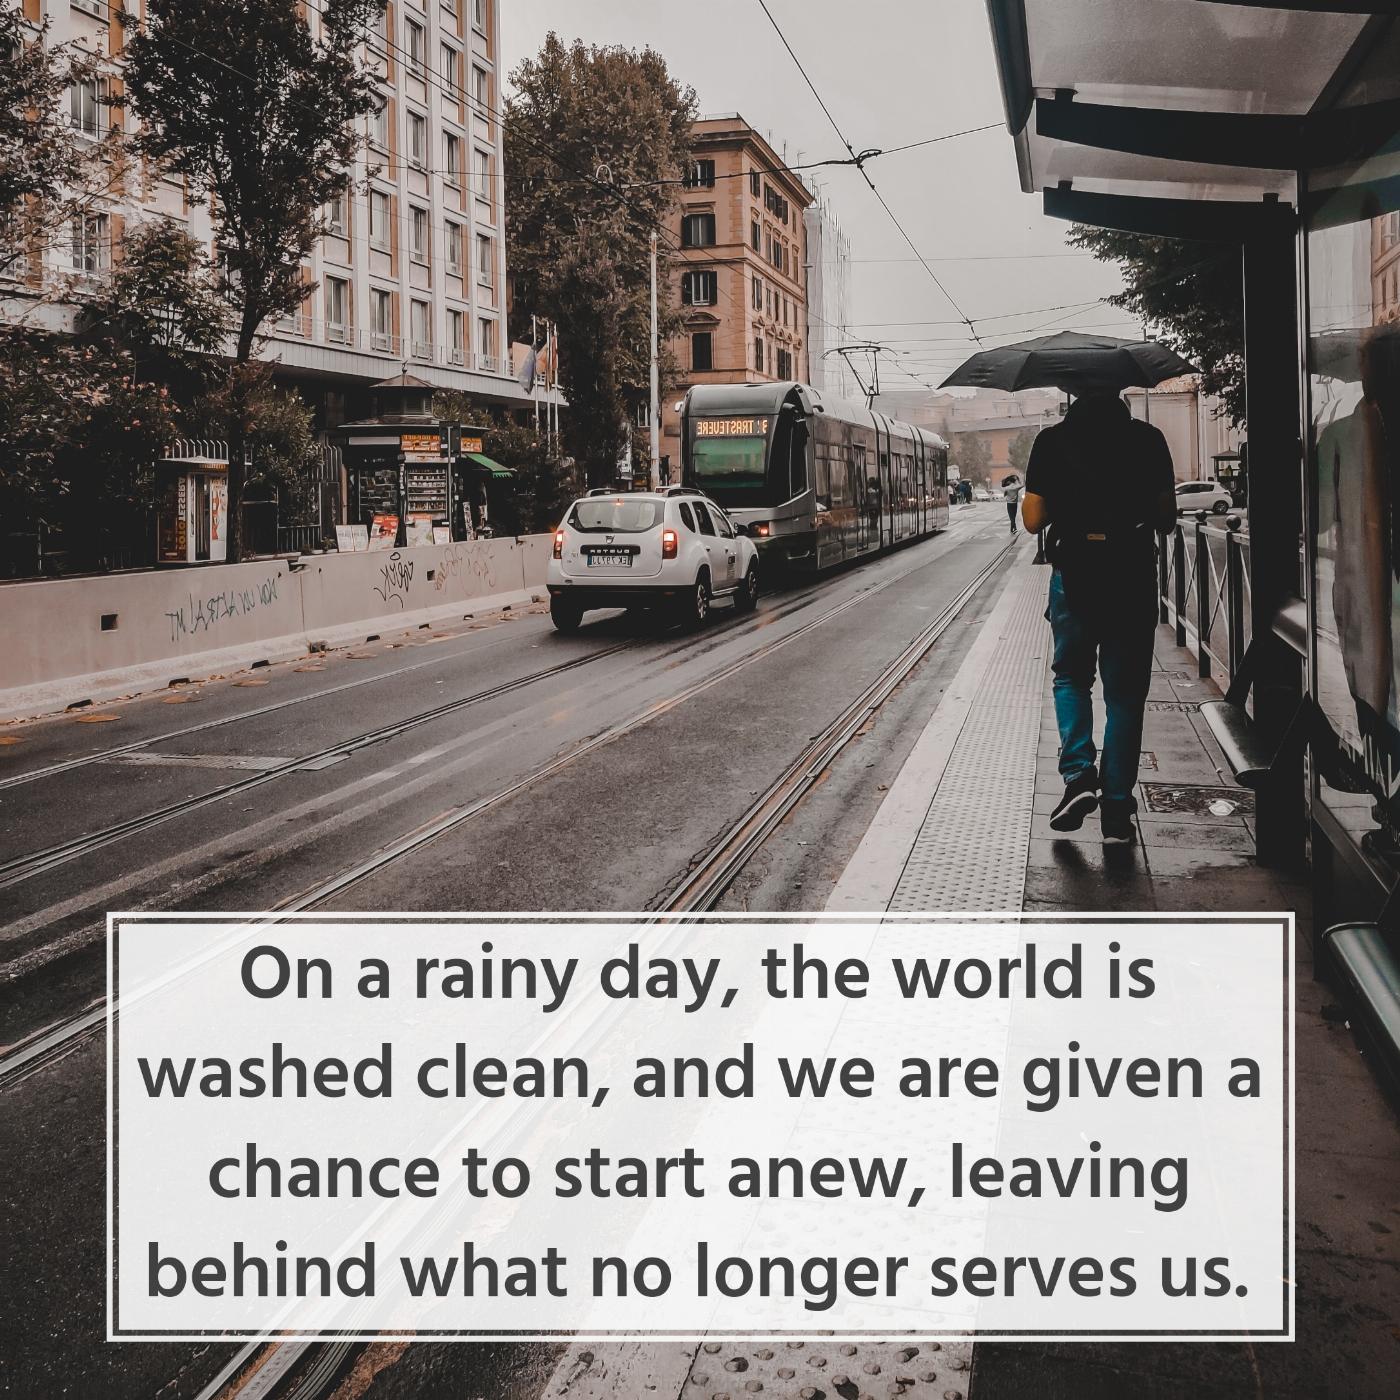 On a rainy day the world is washed clean and we are given a chance